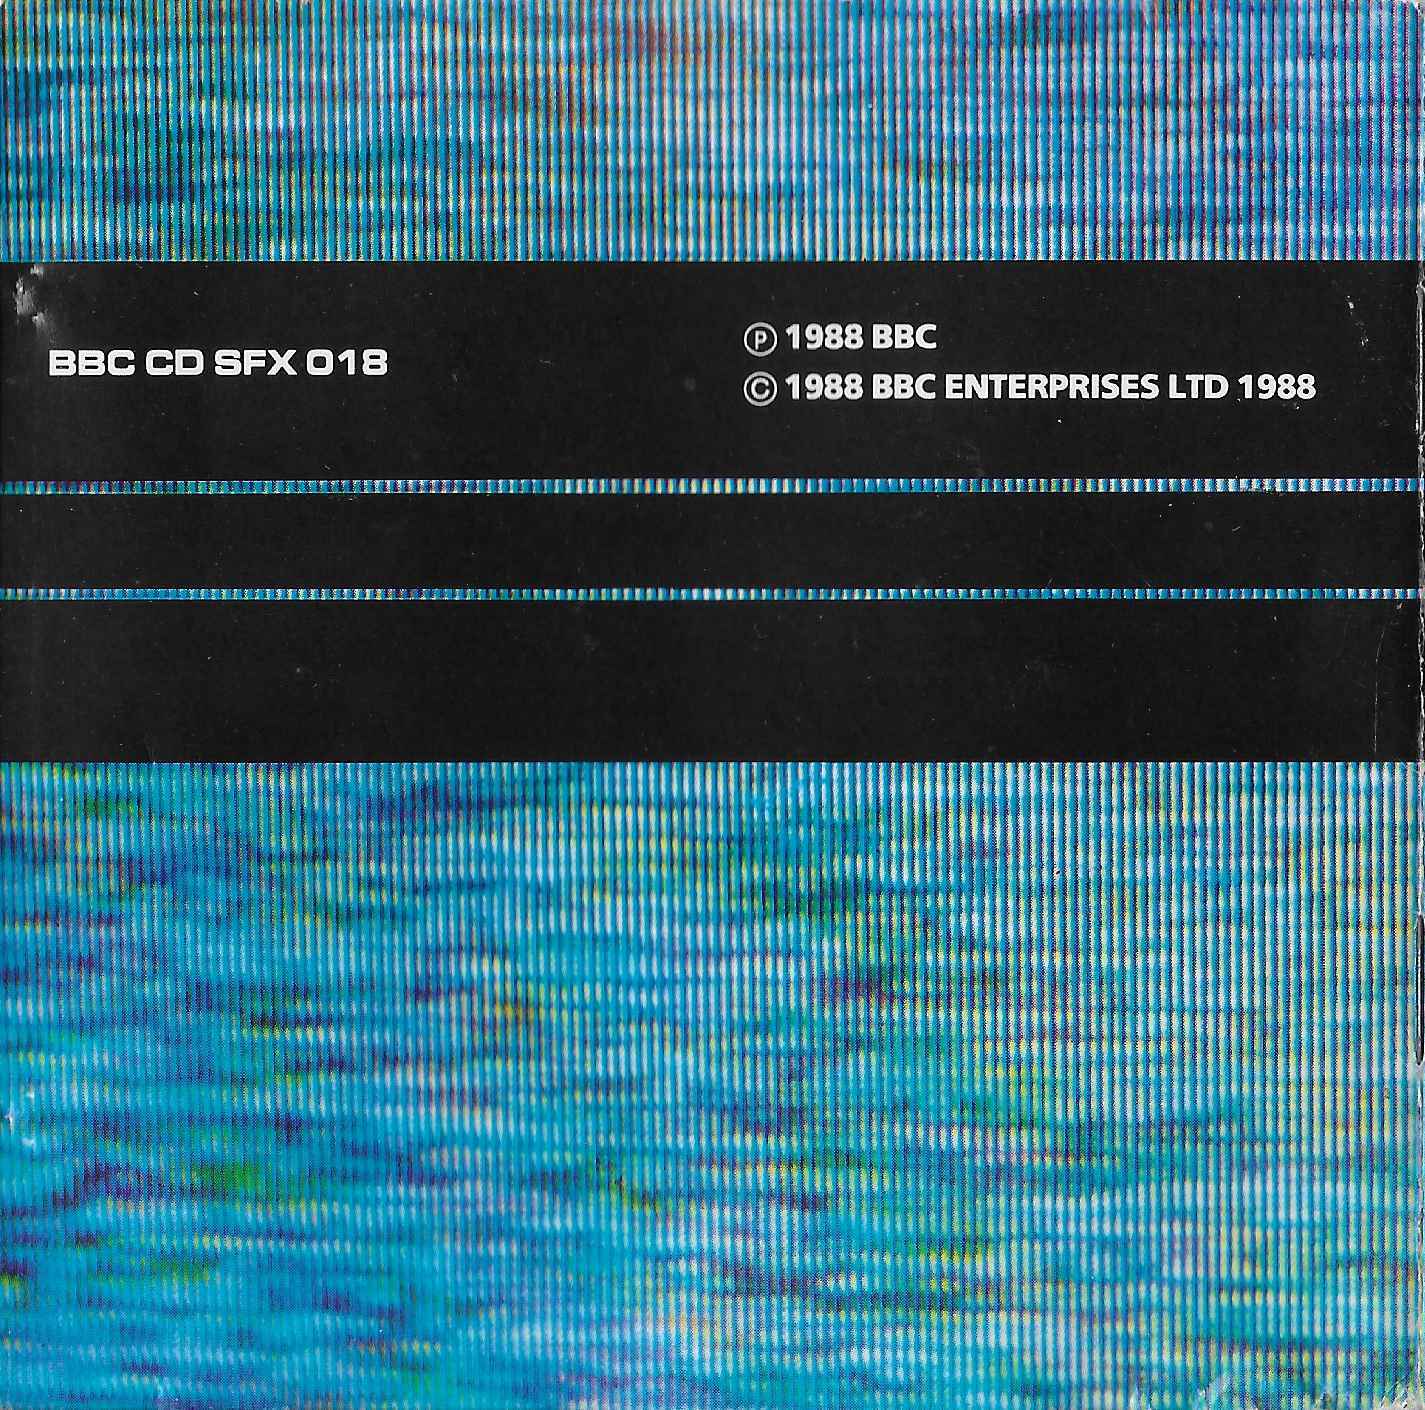 Middle of cover of BBCCD SFX018